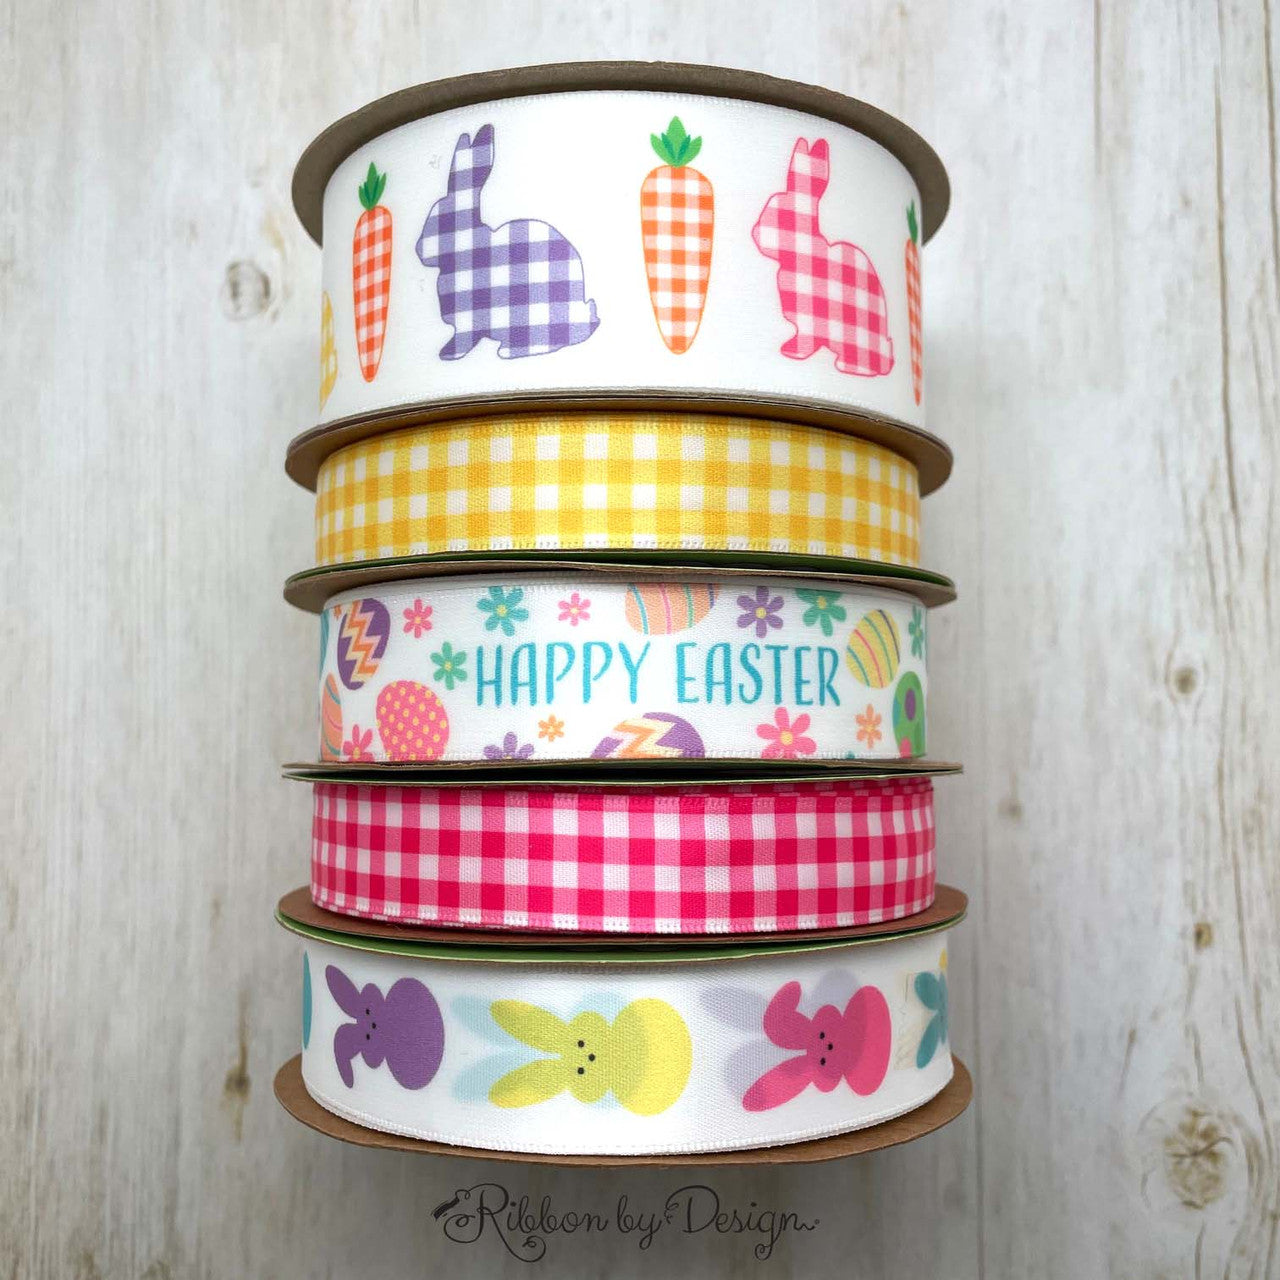 Mix and match our gingham bunnies and carrots with our gingham prints and other Easter designs for the sweetest Easter decor ever!